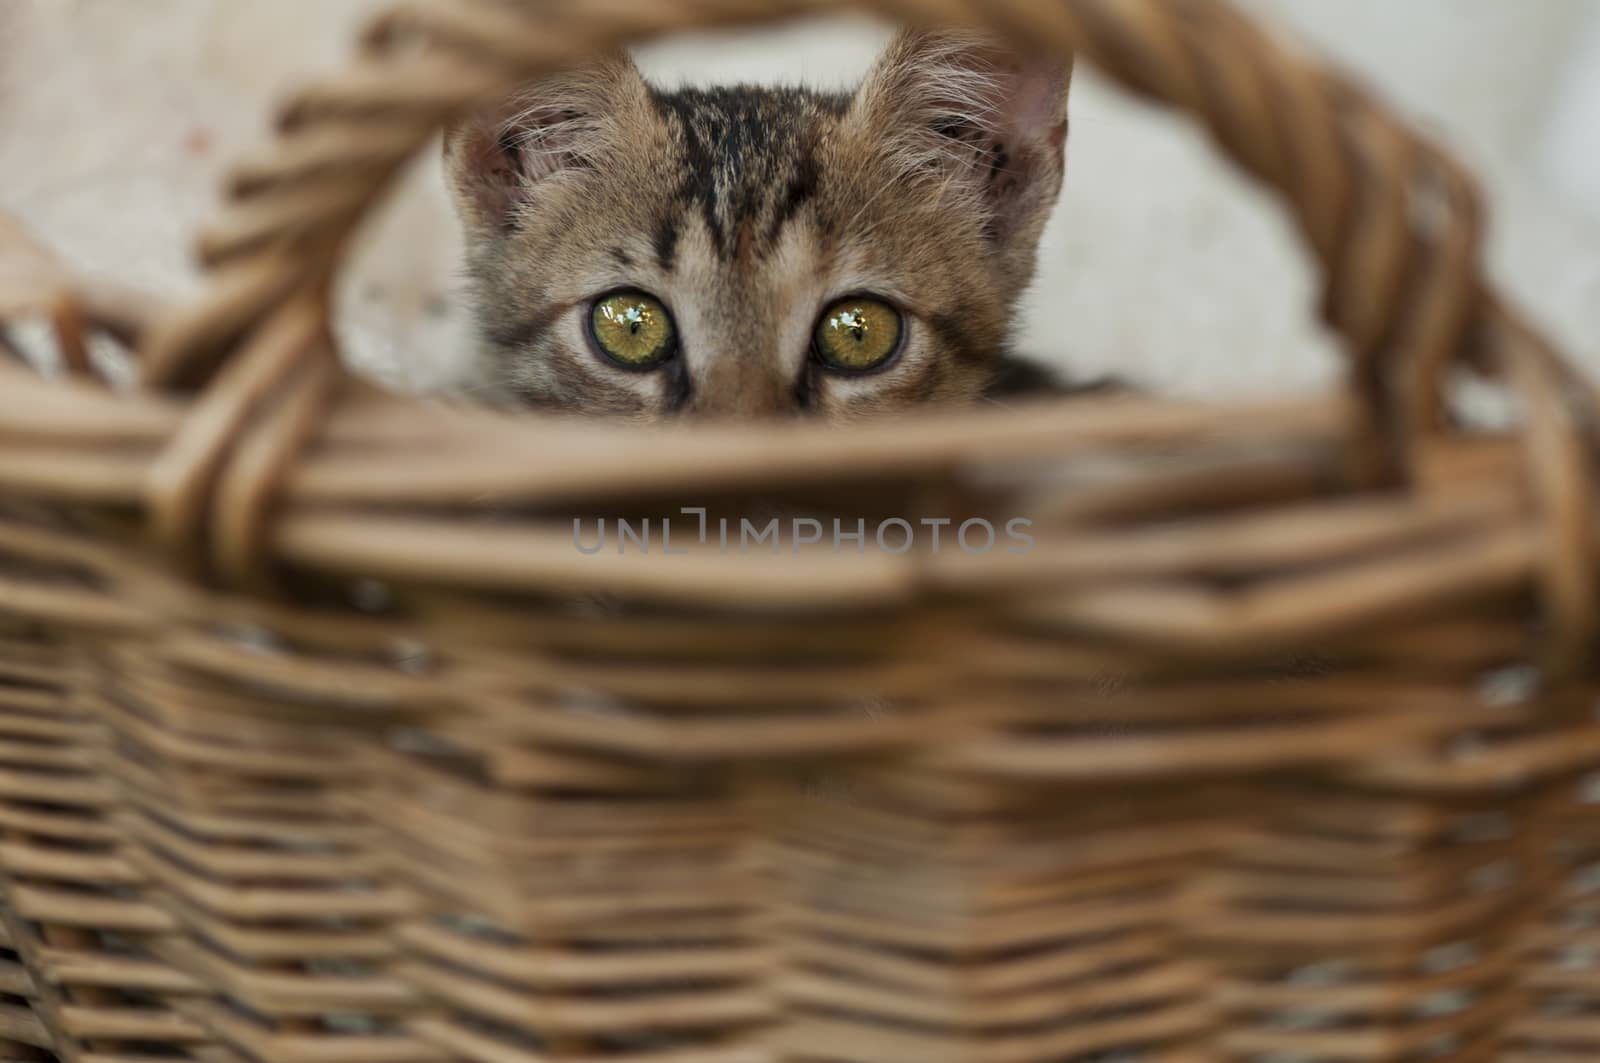 Cat hiding in a basket made of straws